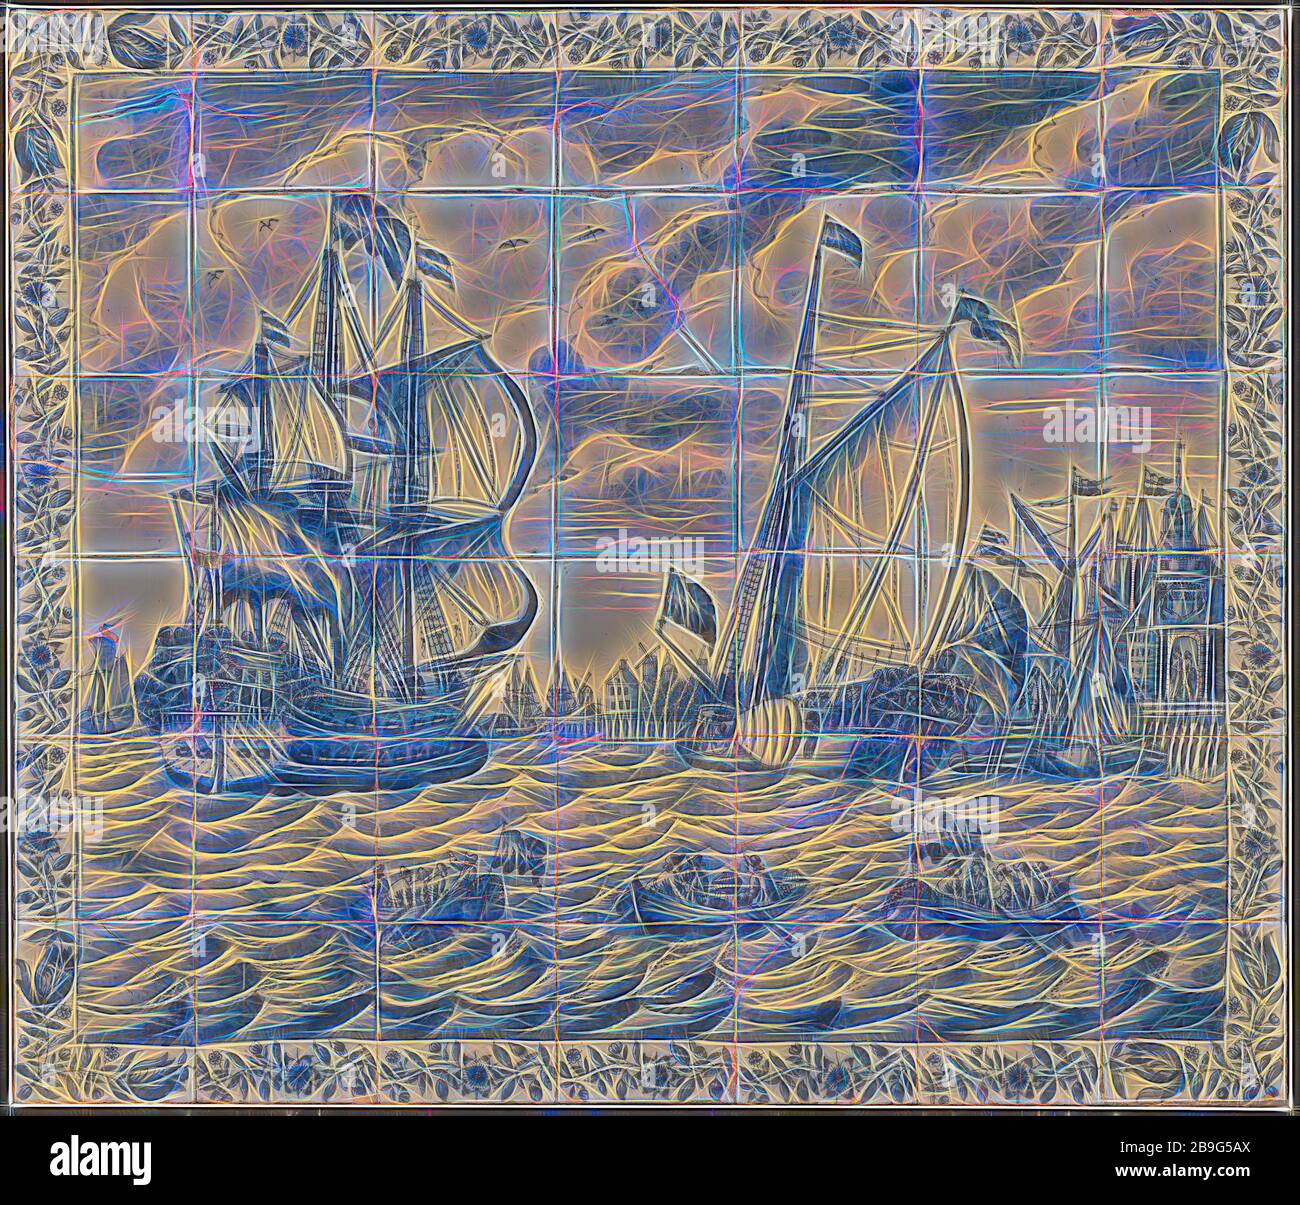 Aalmis sr., Tile panel with the departure in 1688 of Prince William III from Rotterdam to England aplate the Den Briel, tile picture material ceramic earthenware glaze, baked 2x glazed painted Six high seven wide Yellow shard Rotterdam City center Stadsdriehoek Stronghold Boompjes Ooster Oudehoofdpoort Aalmis Aelmis King-stadtholder Prince William III Orange 1688 topography Den Briel Brielle Originating from the corner house Bolwerk on the Maaszijde (pub Stock Photo